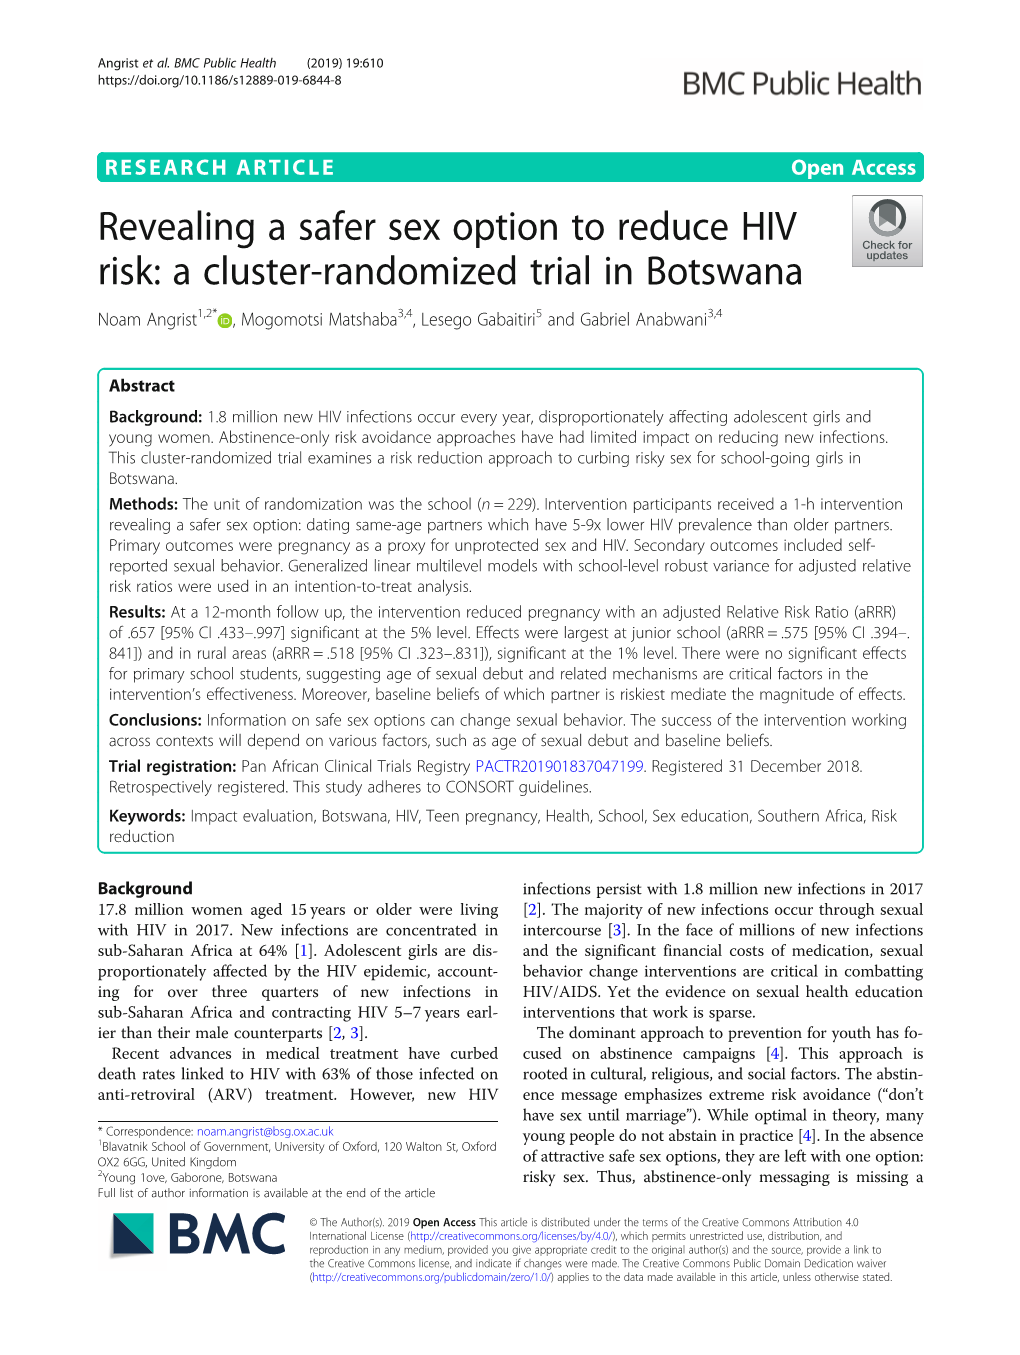 Revealing a Safer Sex Option to Reduce HIV Risk: a Cluster